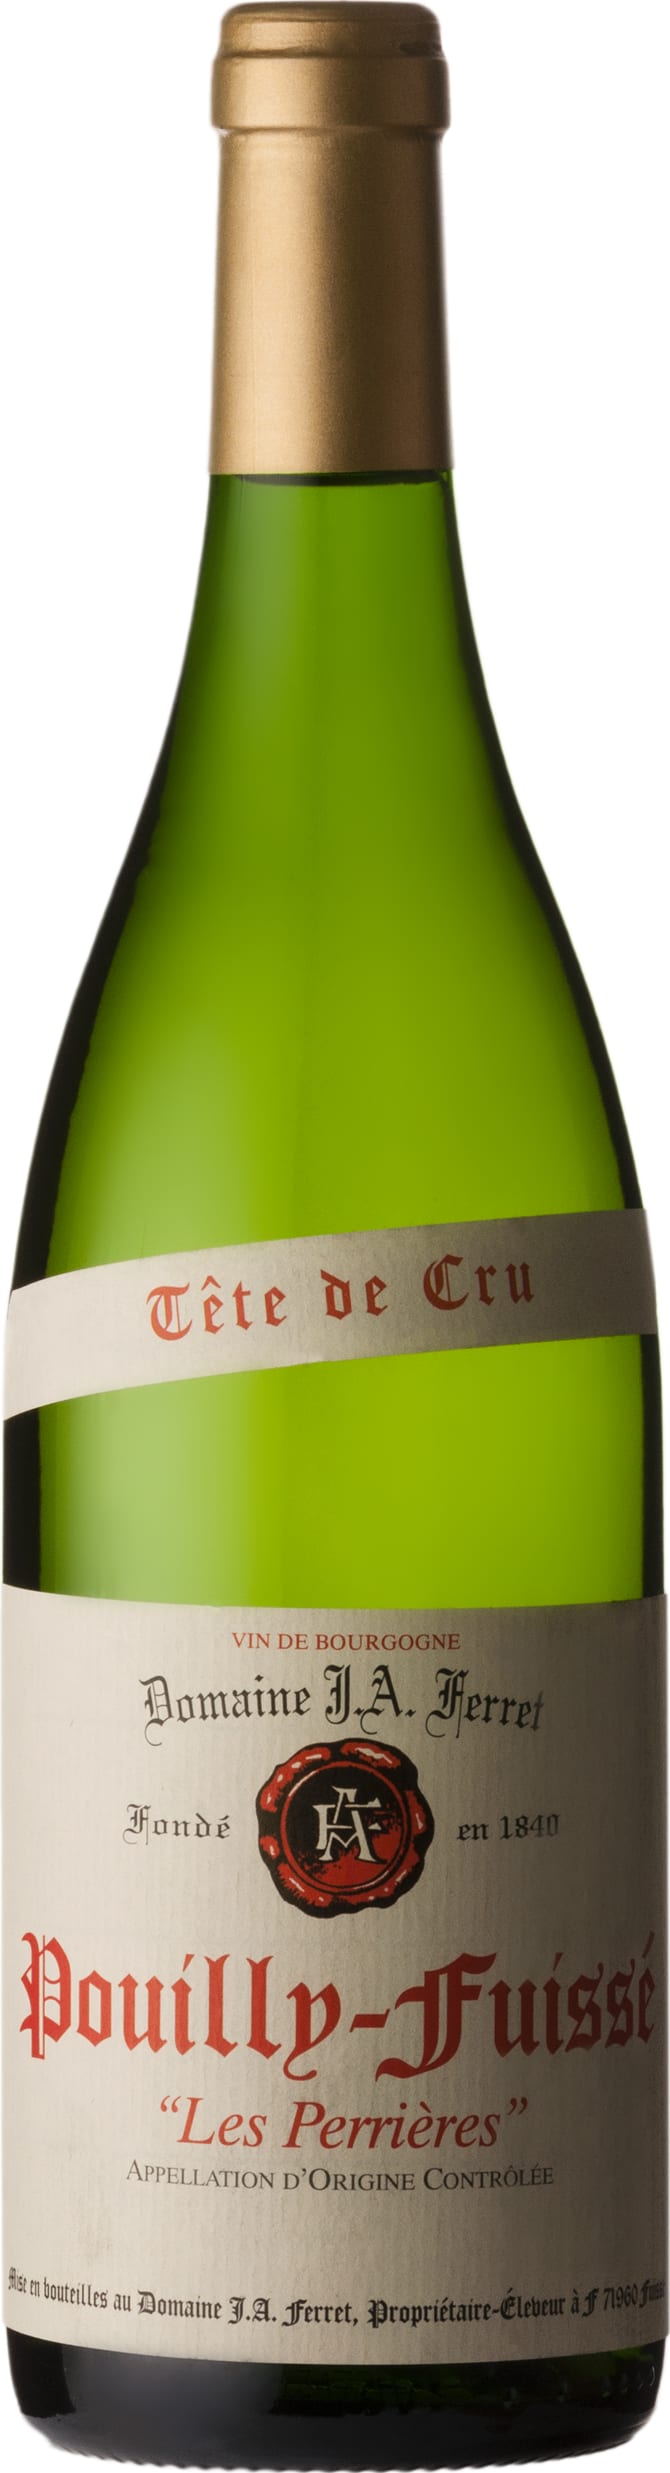 Domaine Ferret Pouilly-Fuisse Tete de Cru Perrieres 2020 75cl - Buy Domaine Ferret Wines from GREAT WINES DIRECT wine shop